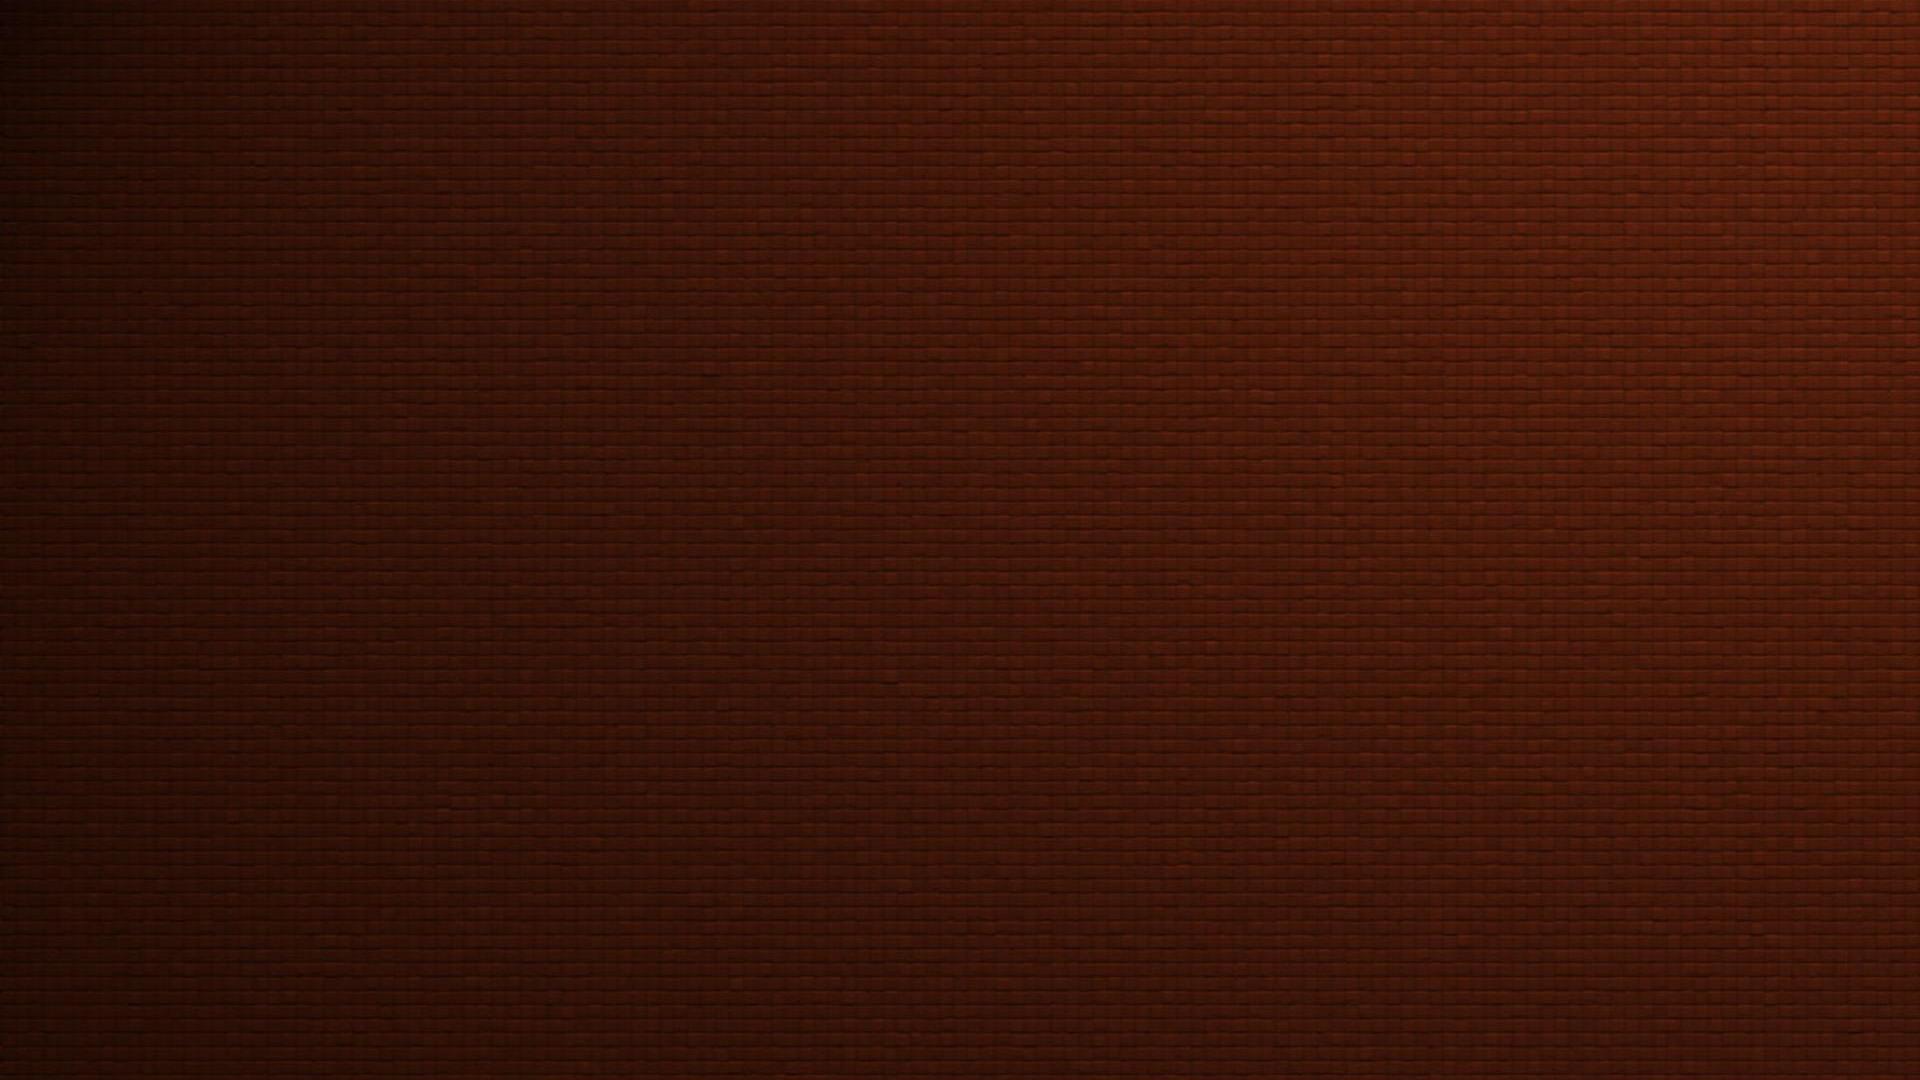 wallpaper squares abstract brown wallpapers 1920x1080 1920x1080